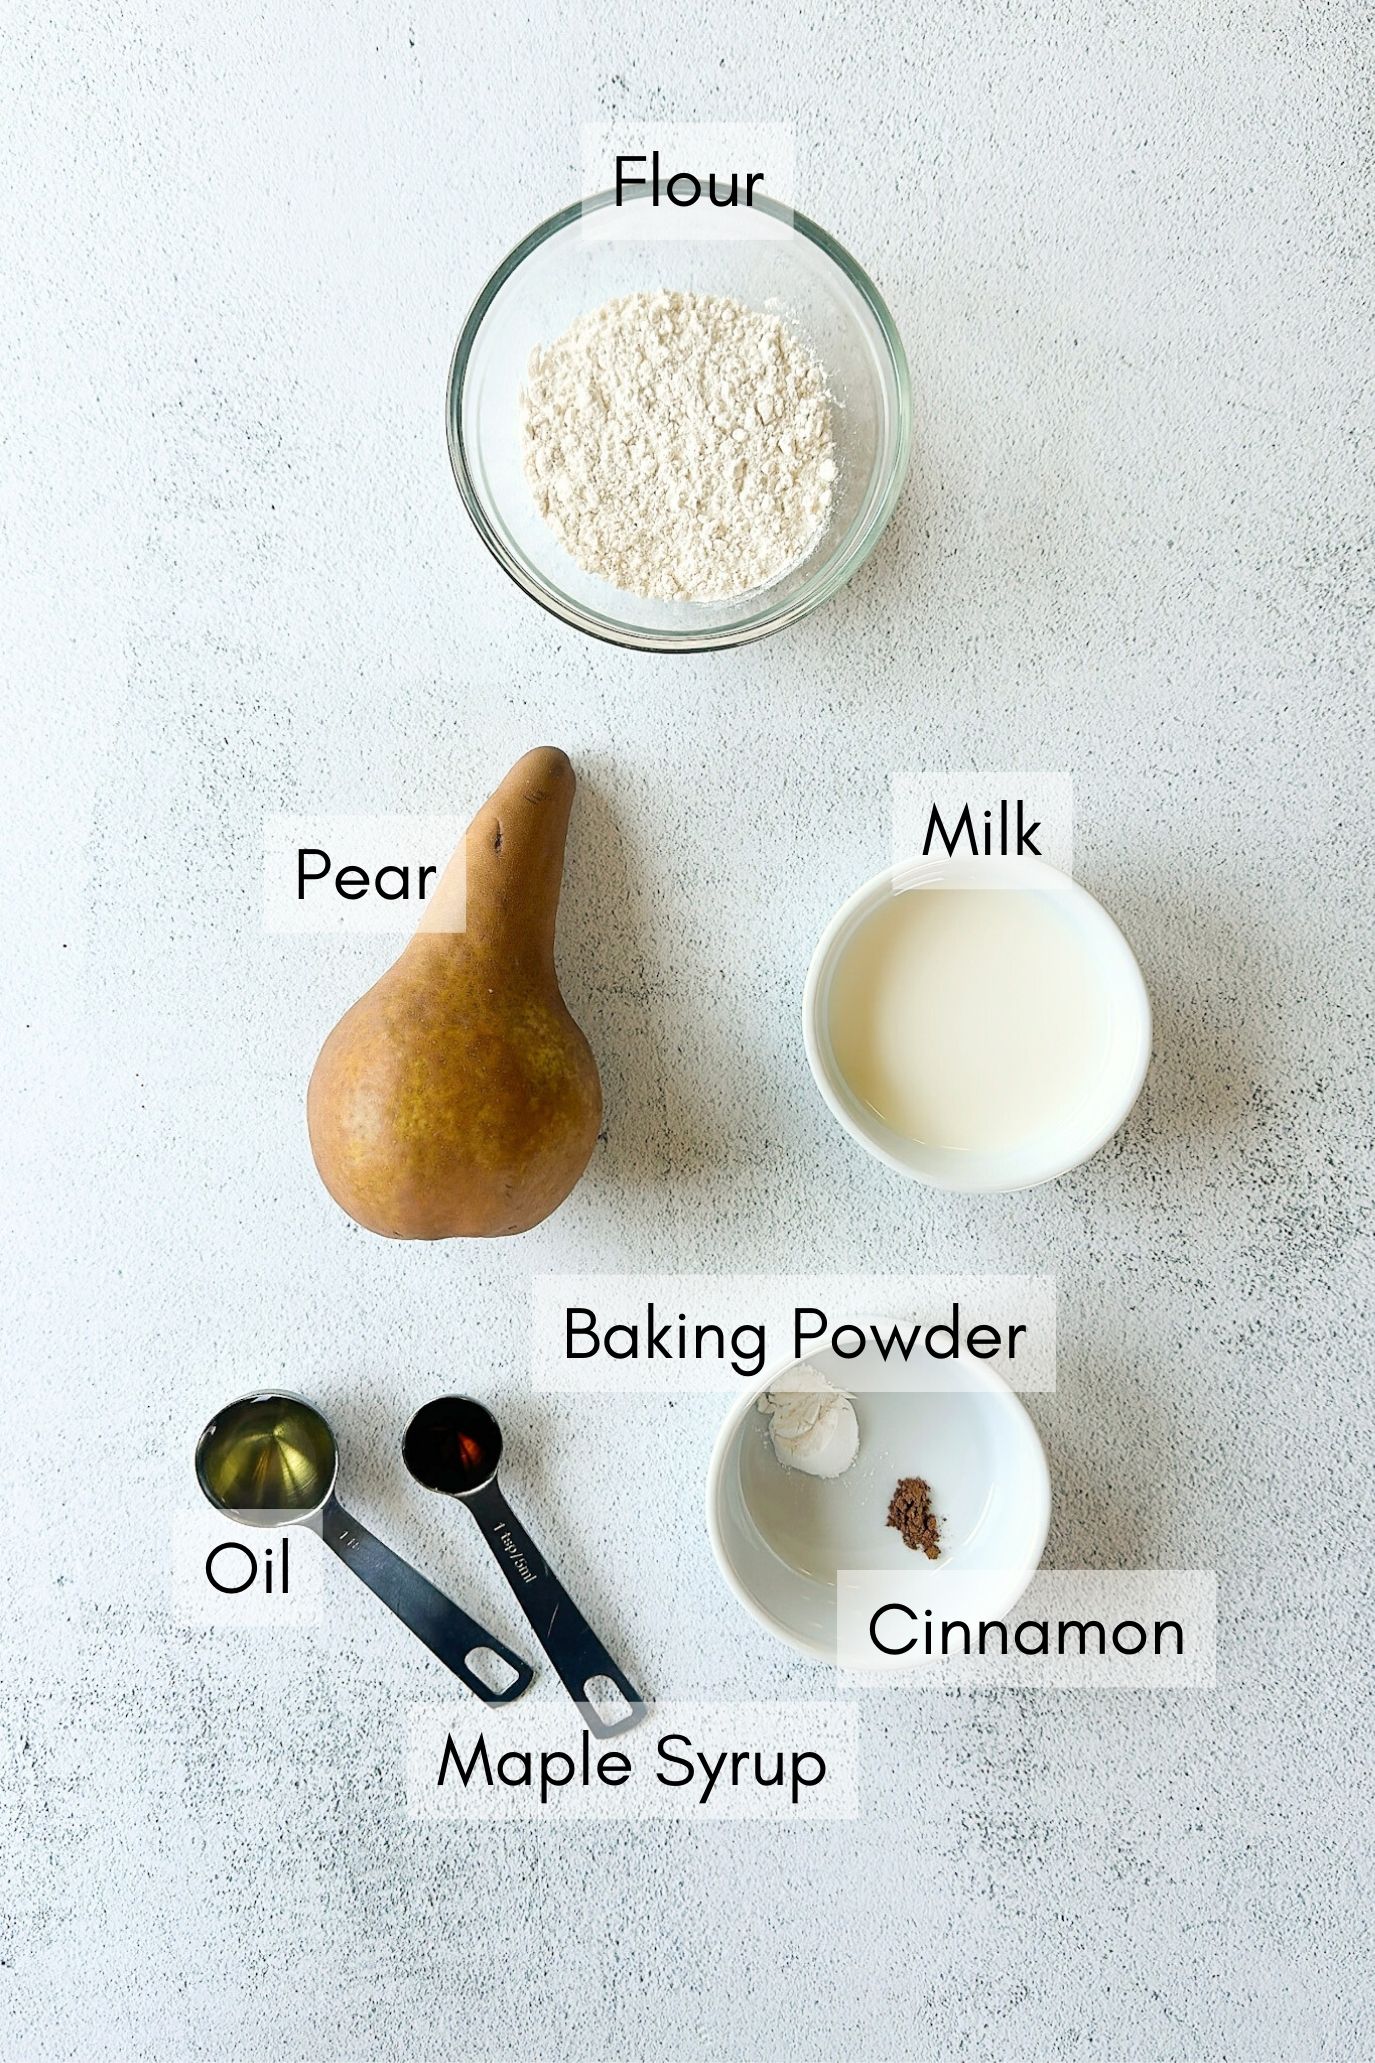 Ingredients to make pancakes with pears.